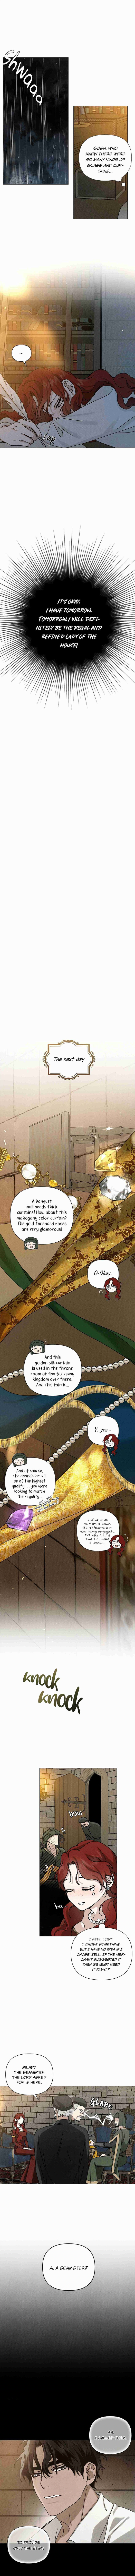 Under the Oak Tree Chapter 13 page 5